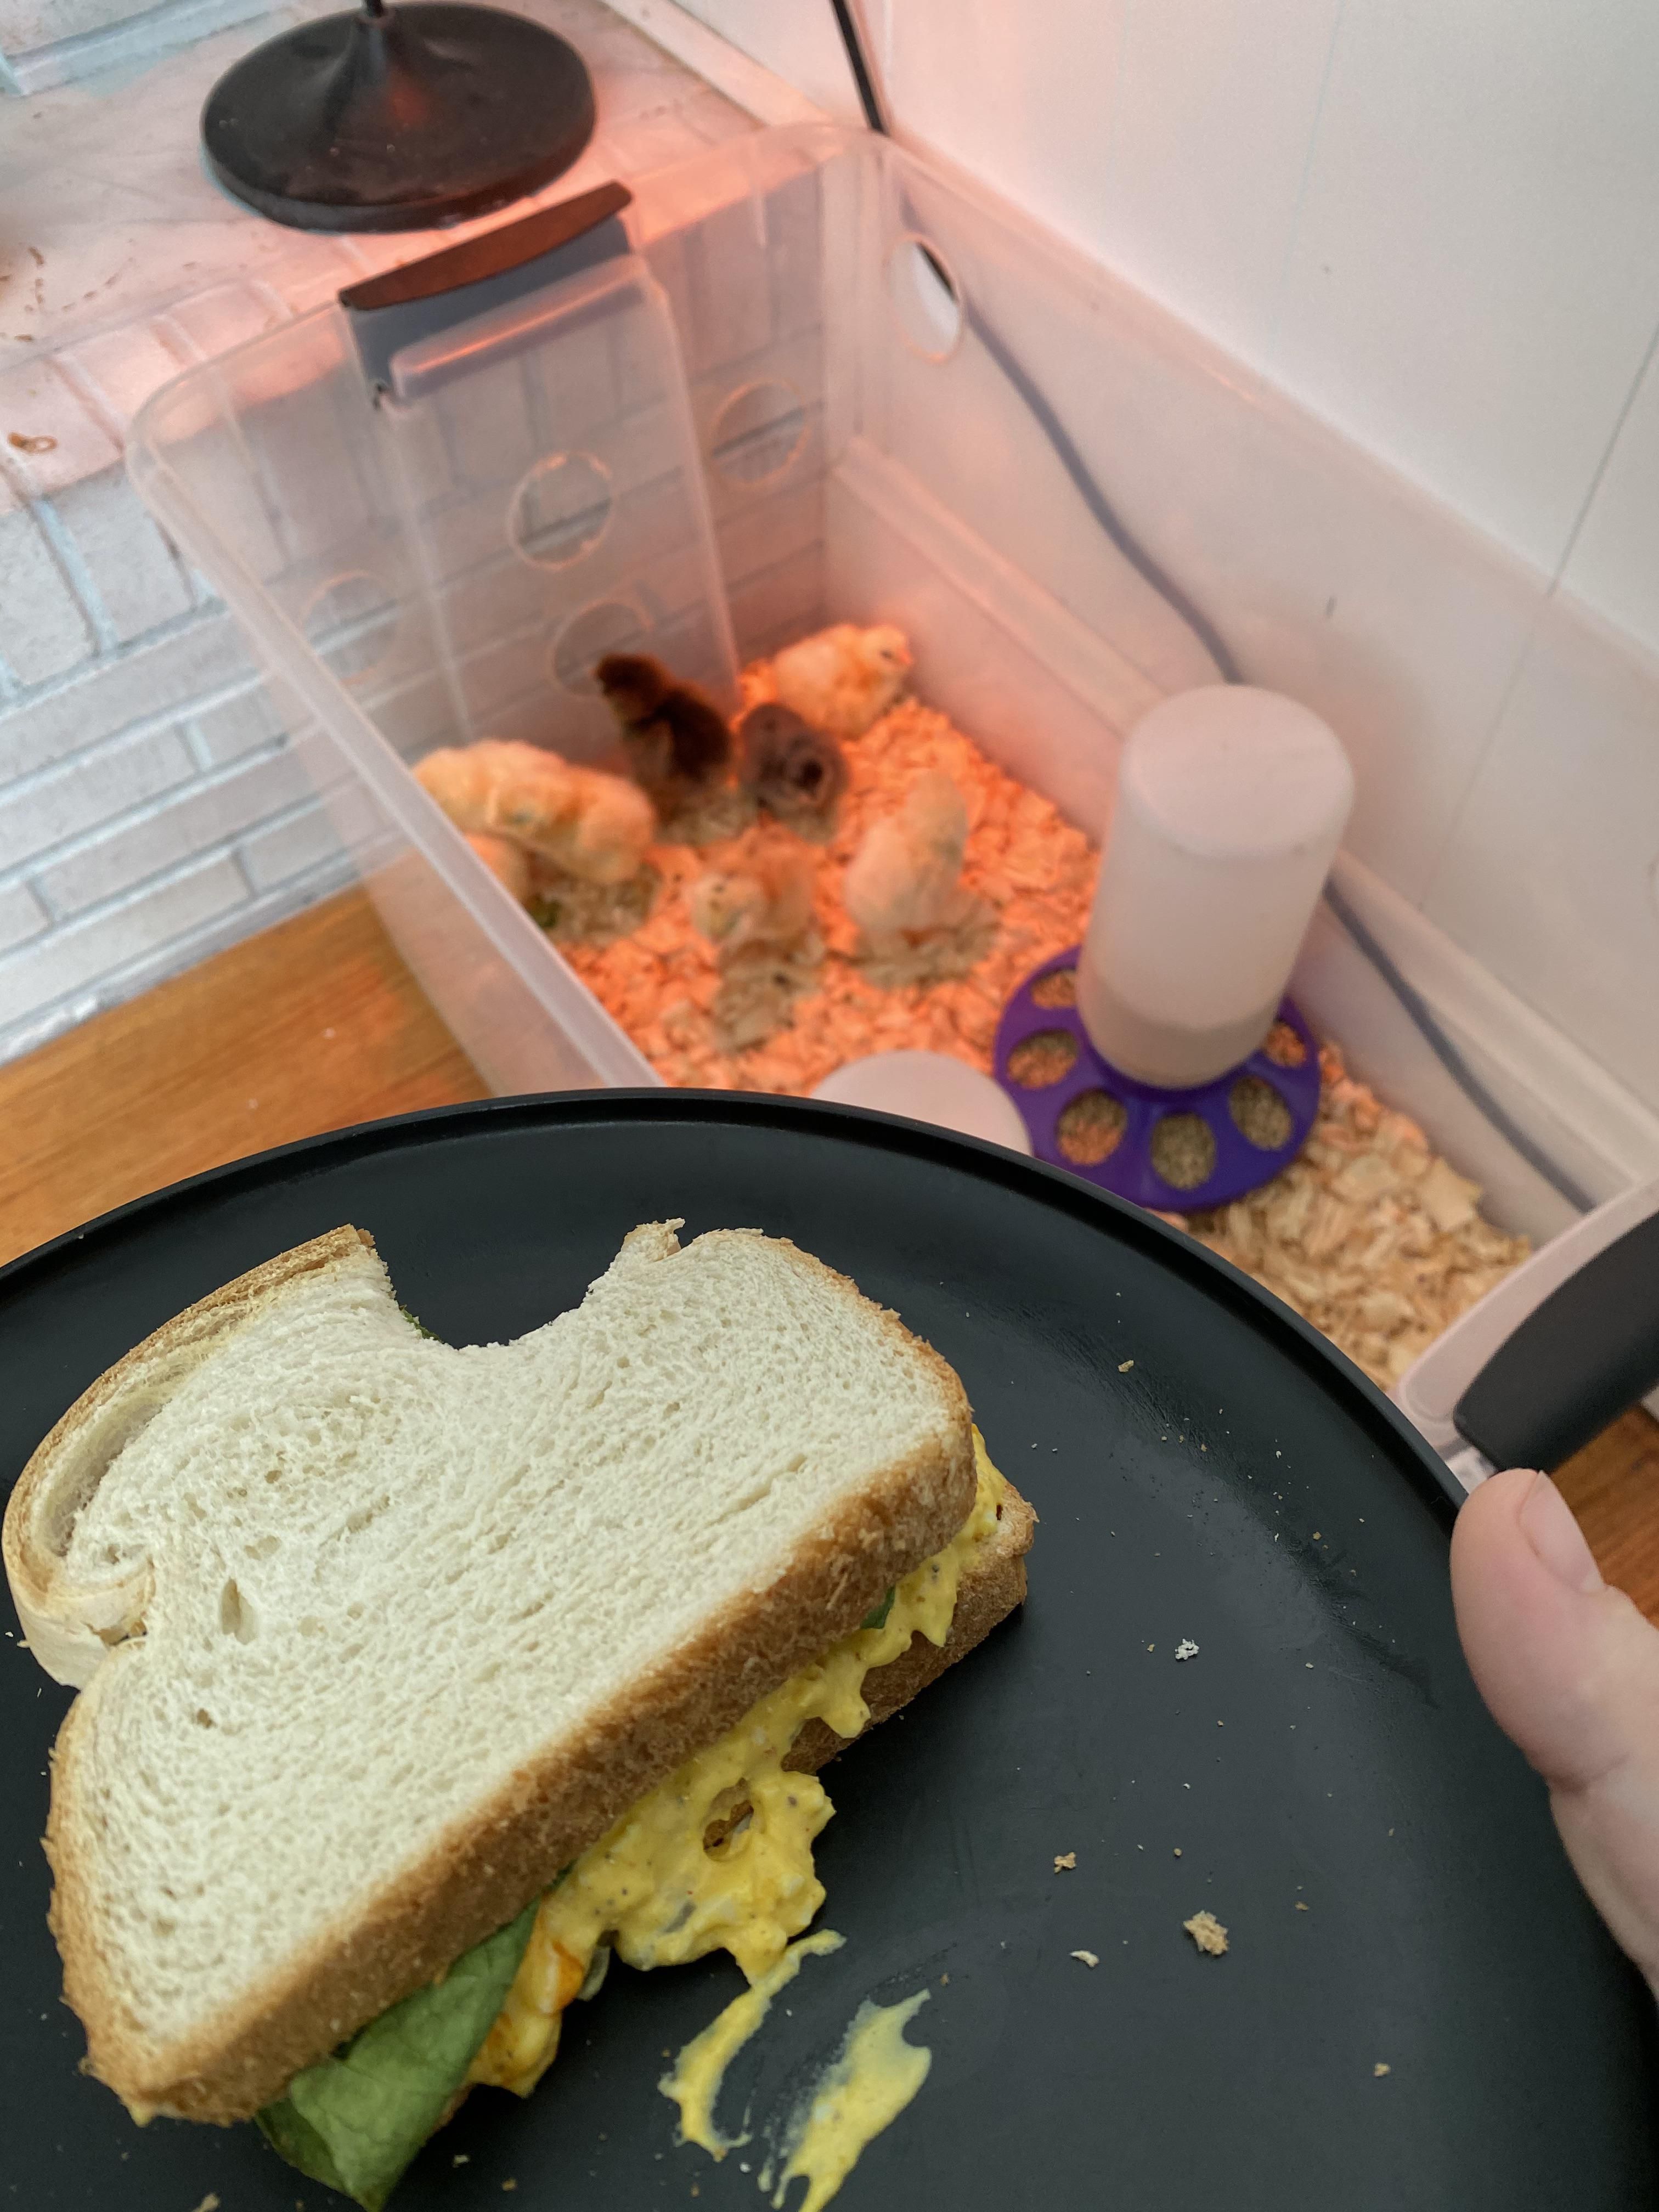 Day 0 - Training begins... eat egg salad sandwich in front of them to display dominance, installing yourself as the Alpha.